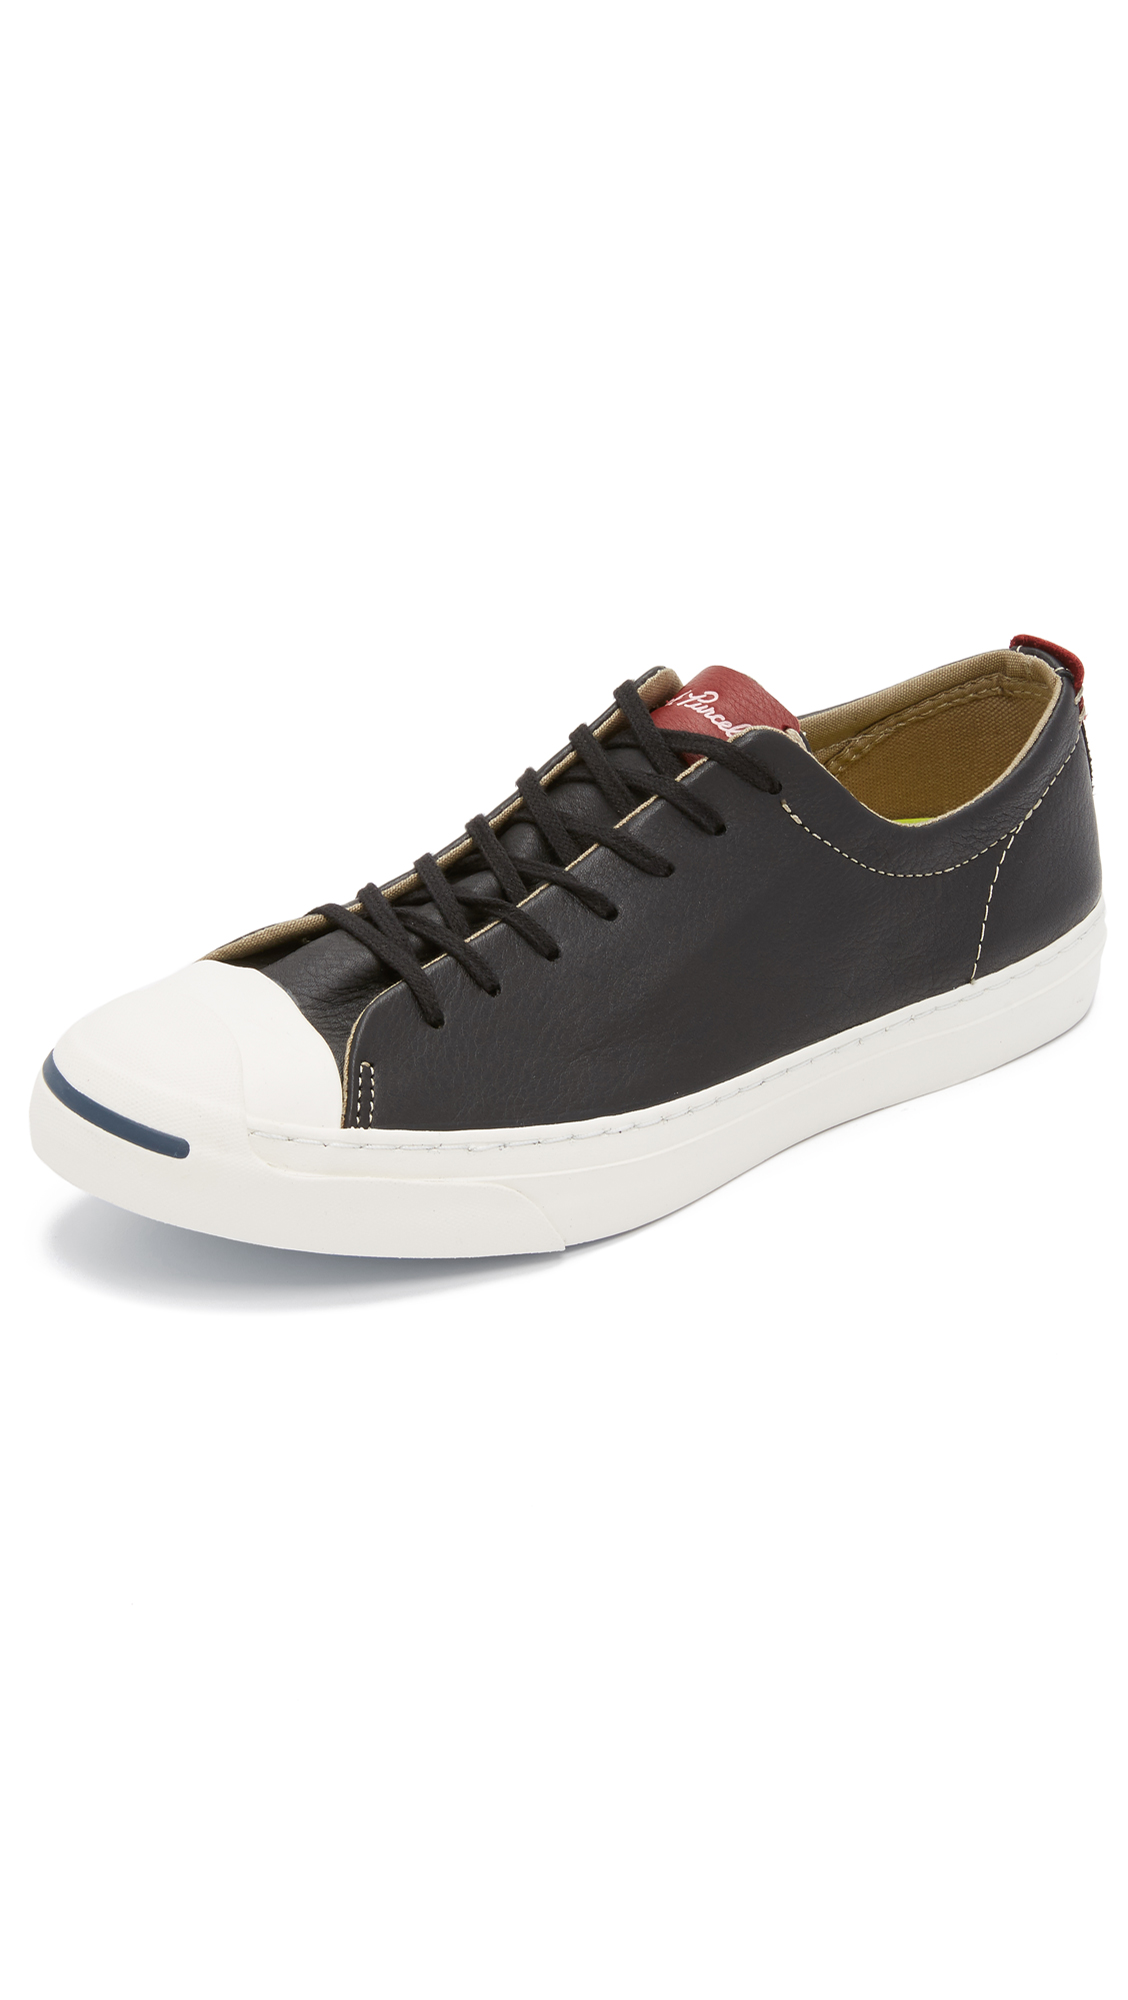 Converse Jack Purcell Jack Tumbled Leather Sneakers In Black/egret/back ...